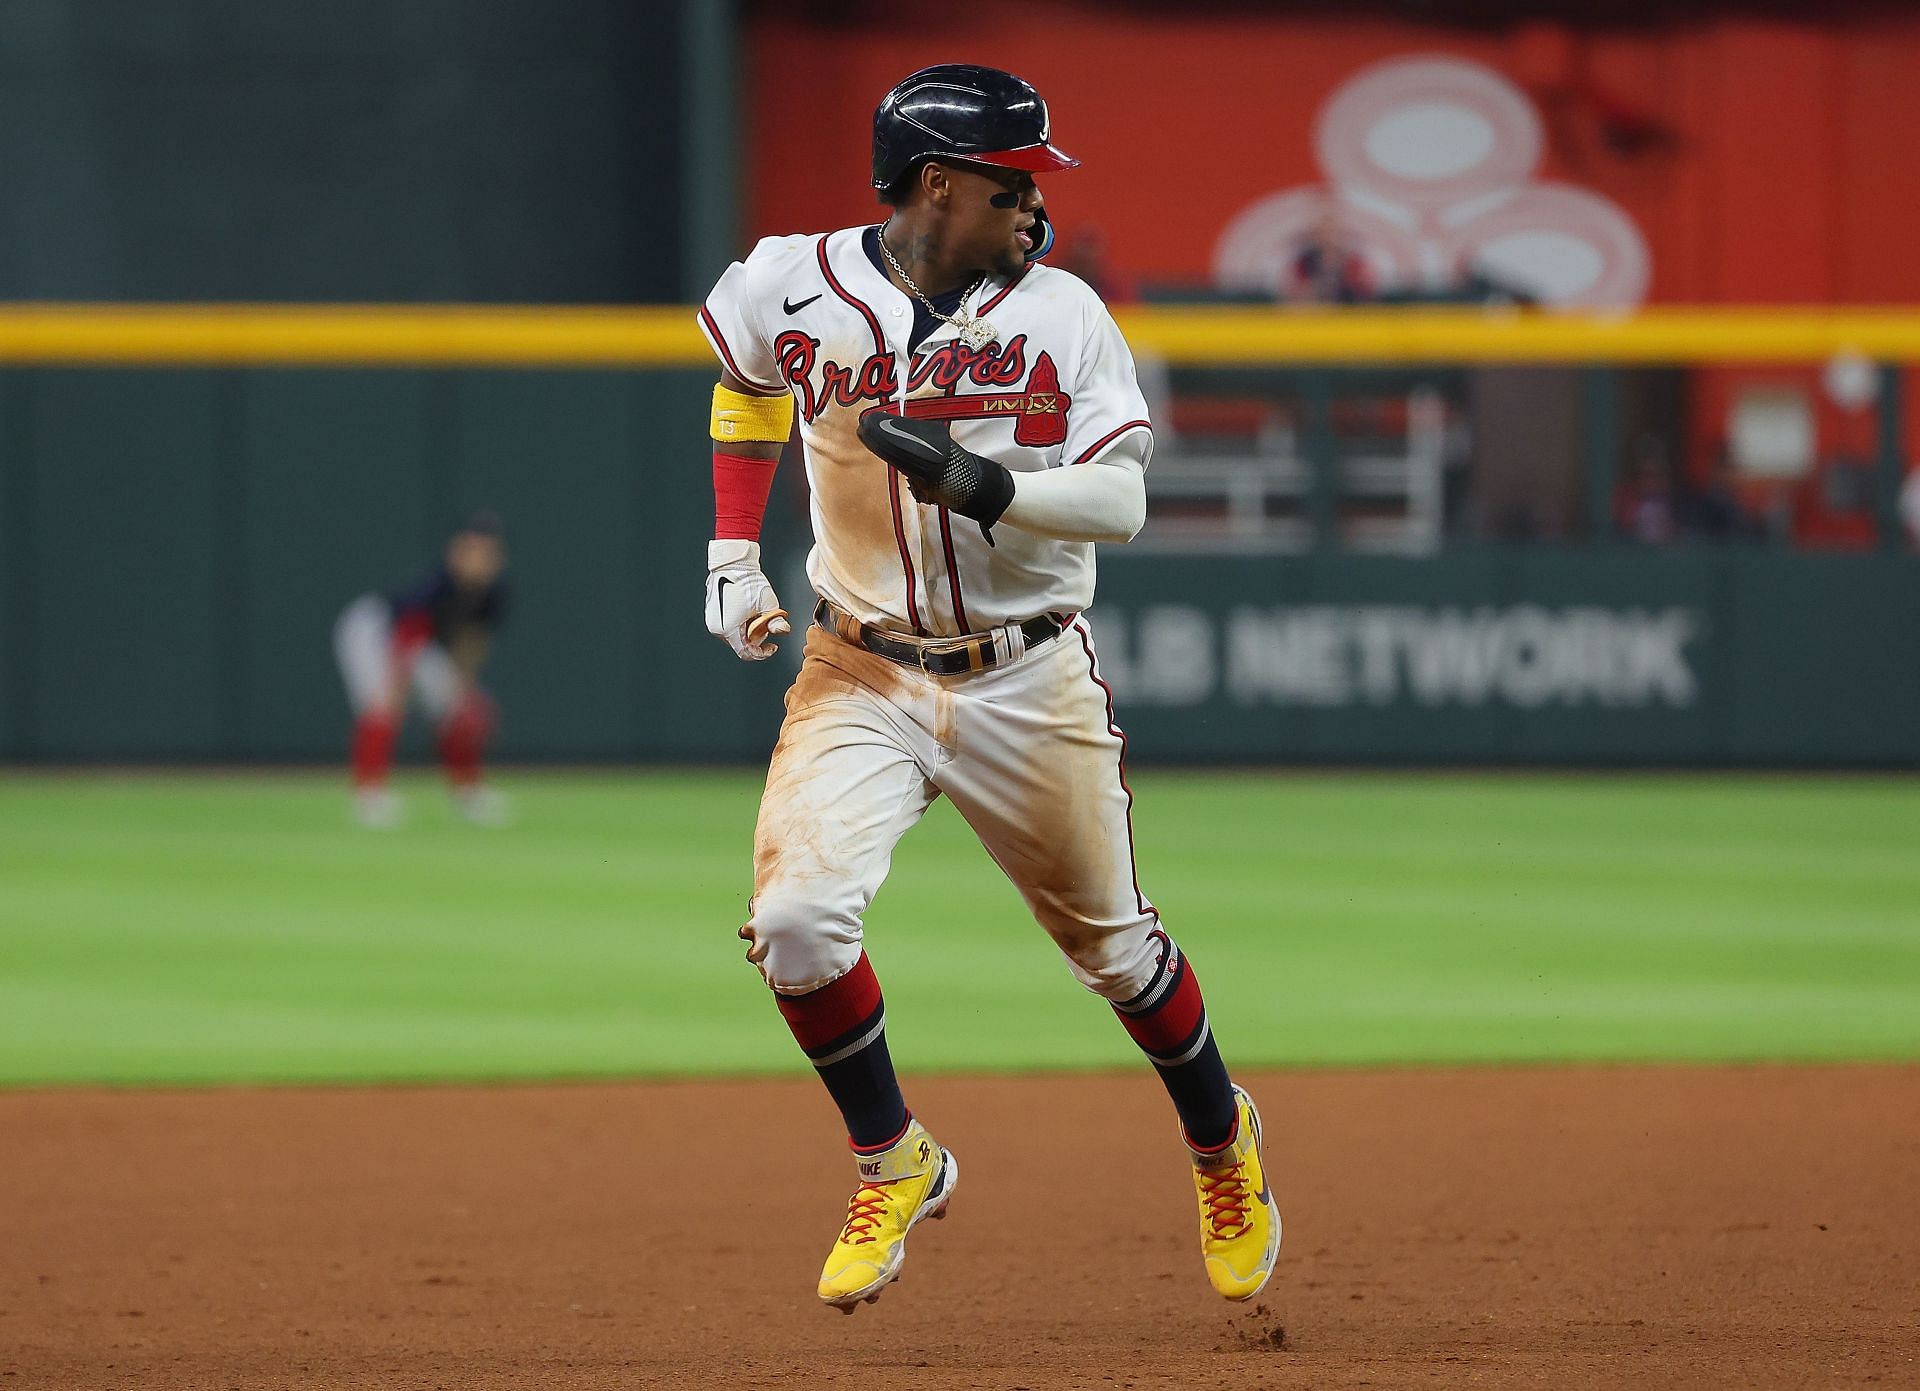 The Braves superstar leads the MLB in stolen bases.